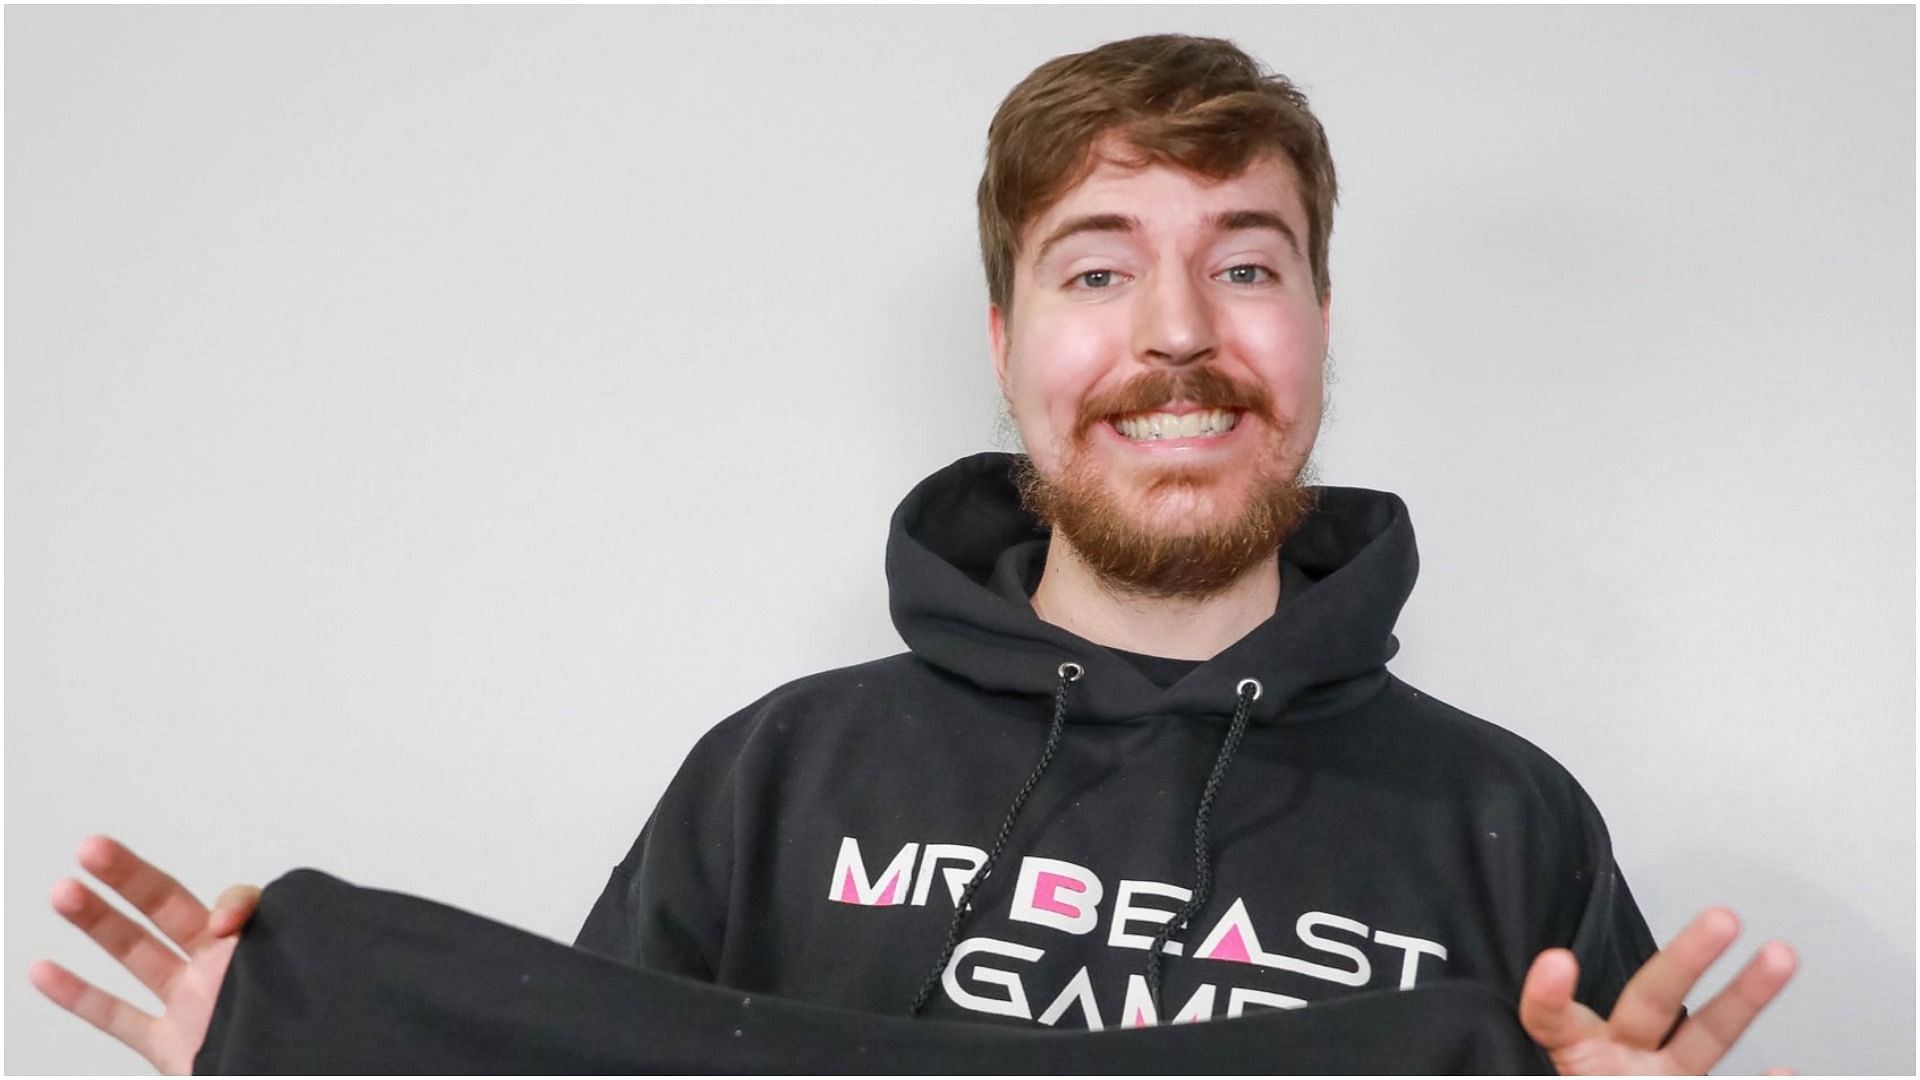 MrBeast has taken on some huge projects during his young career (Image via MrBeast/Twitter)